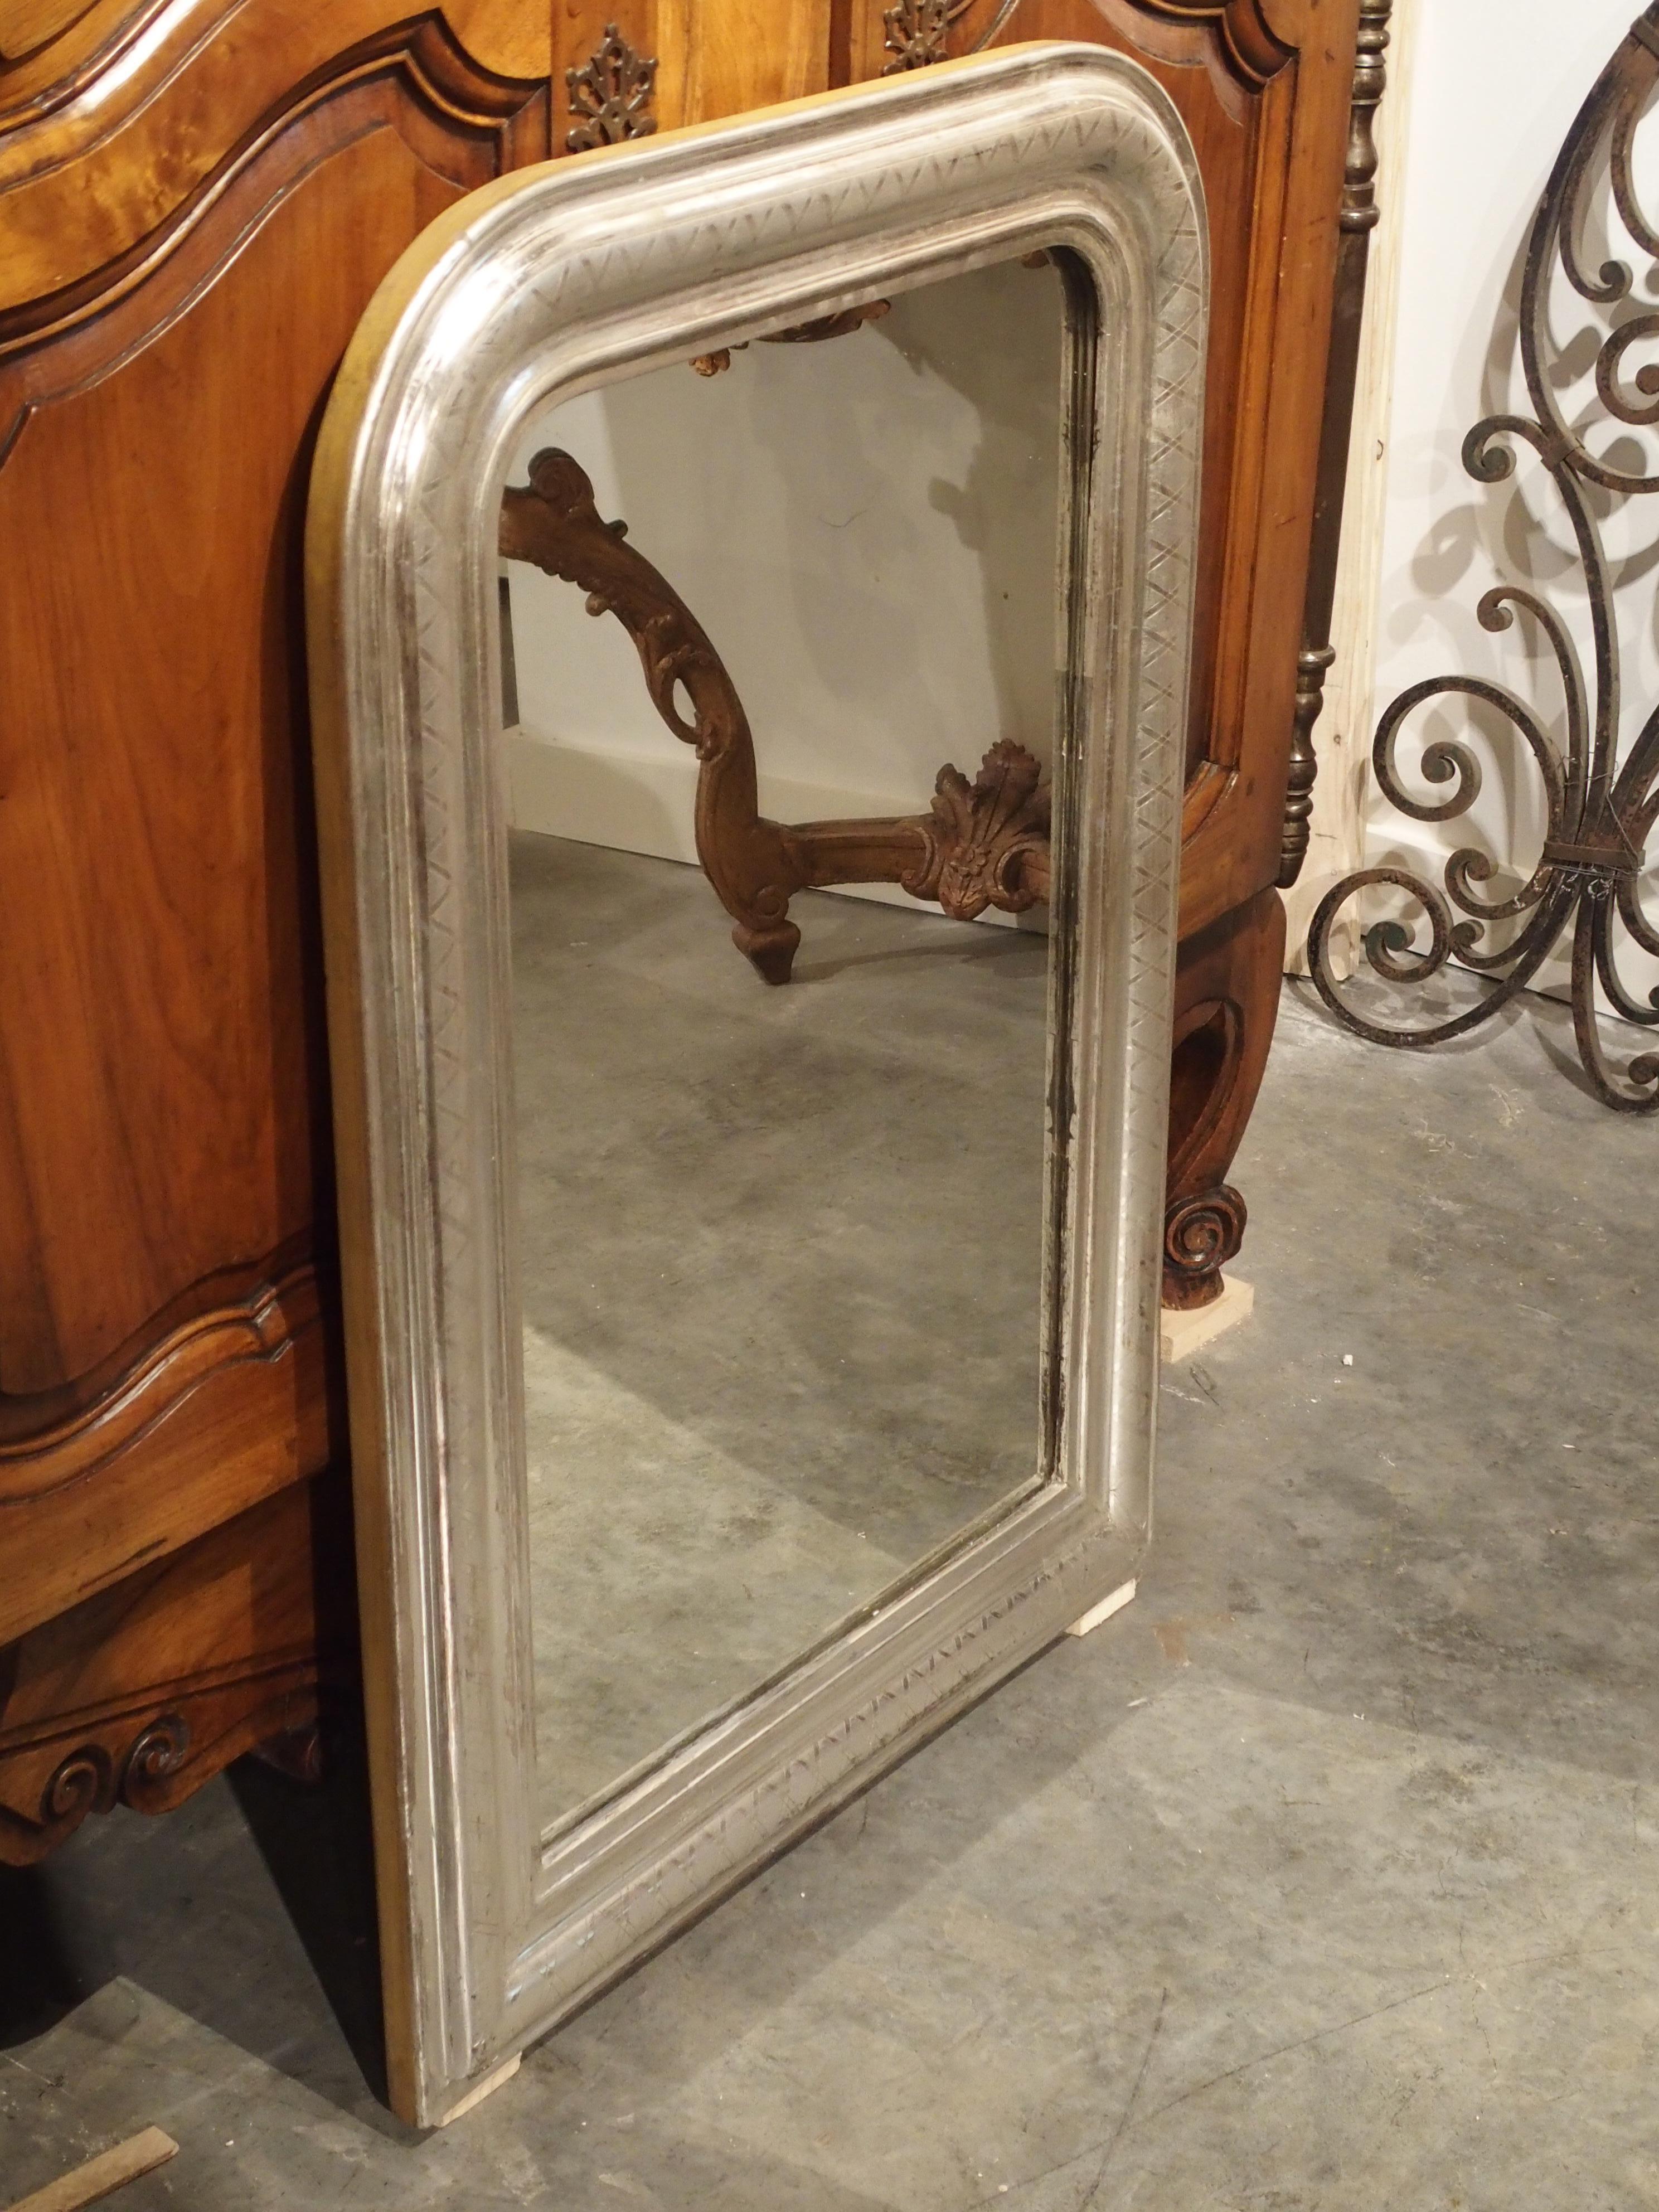 Versatile in its design and function, this silverleaf Louis Philippe mirror can be used in a modern or antique setting. The raised center section of this Louis Philippe has linear ornamentation of gadrooned X’s. The adjacent moldings are indented